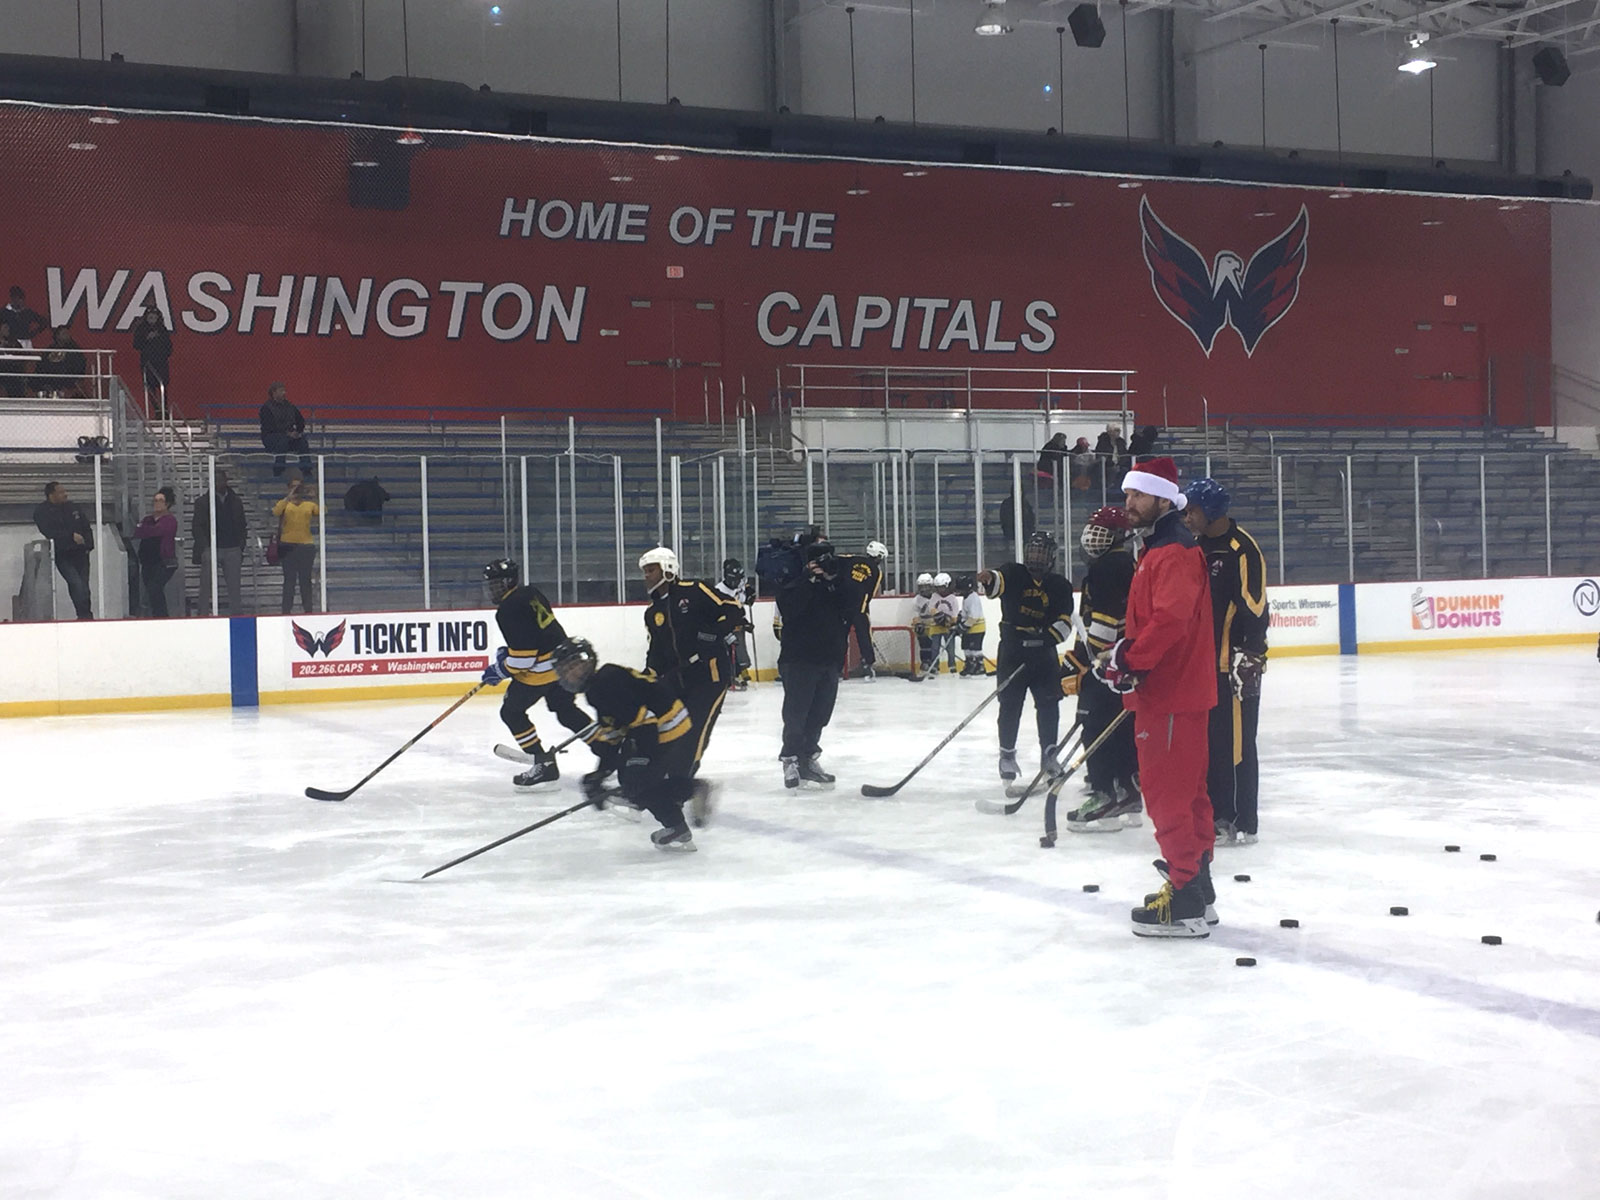 Kettler Capitals Iceplex: A Fan's Guide to the Capitals' Practice